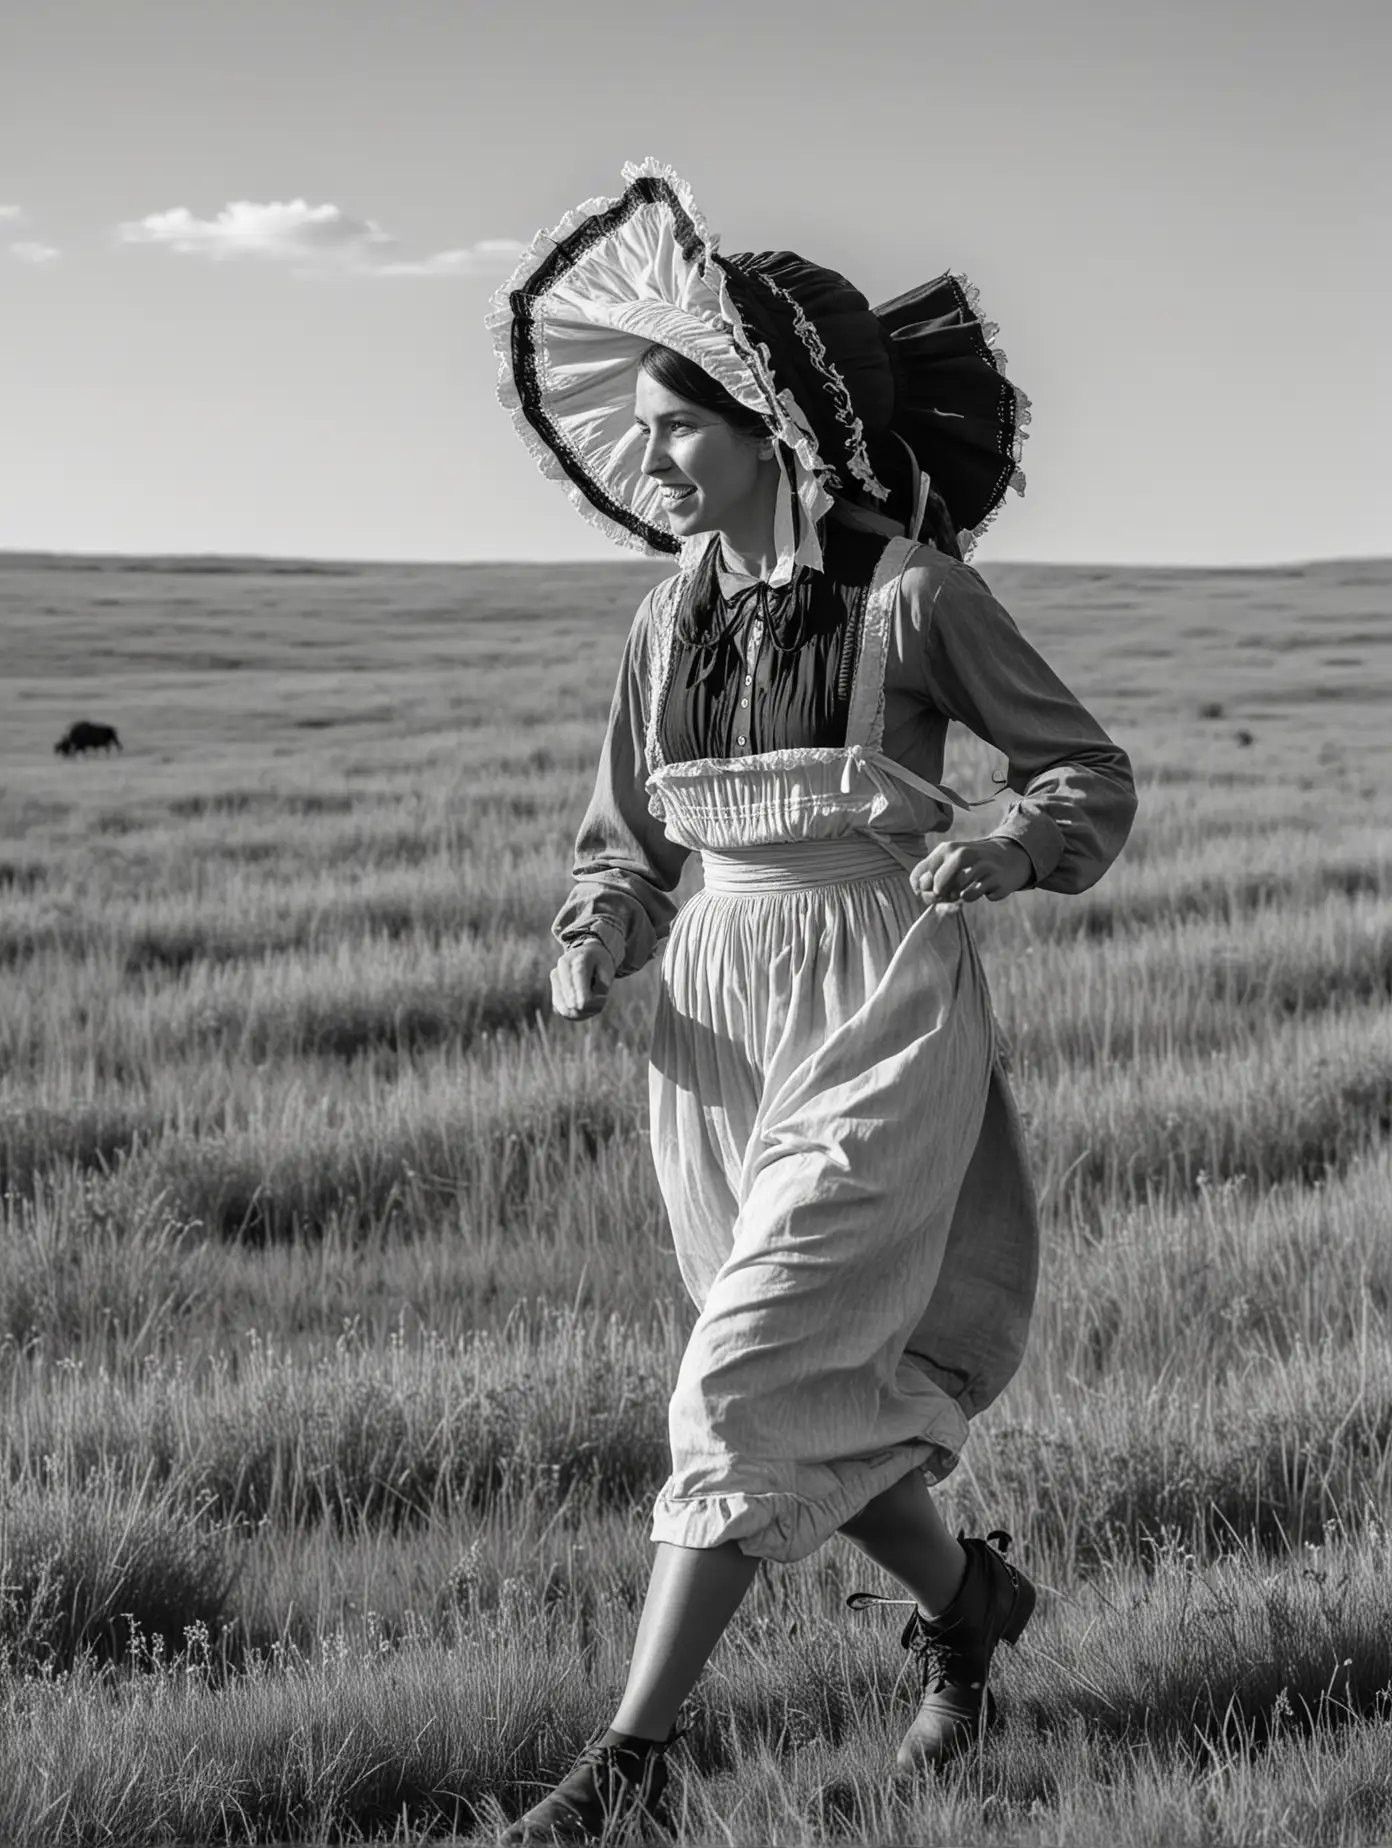 American Pioneer Woman Running Through Prairie with Buffalo in Black and White